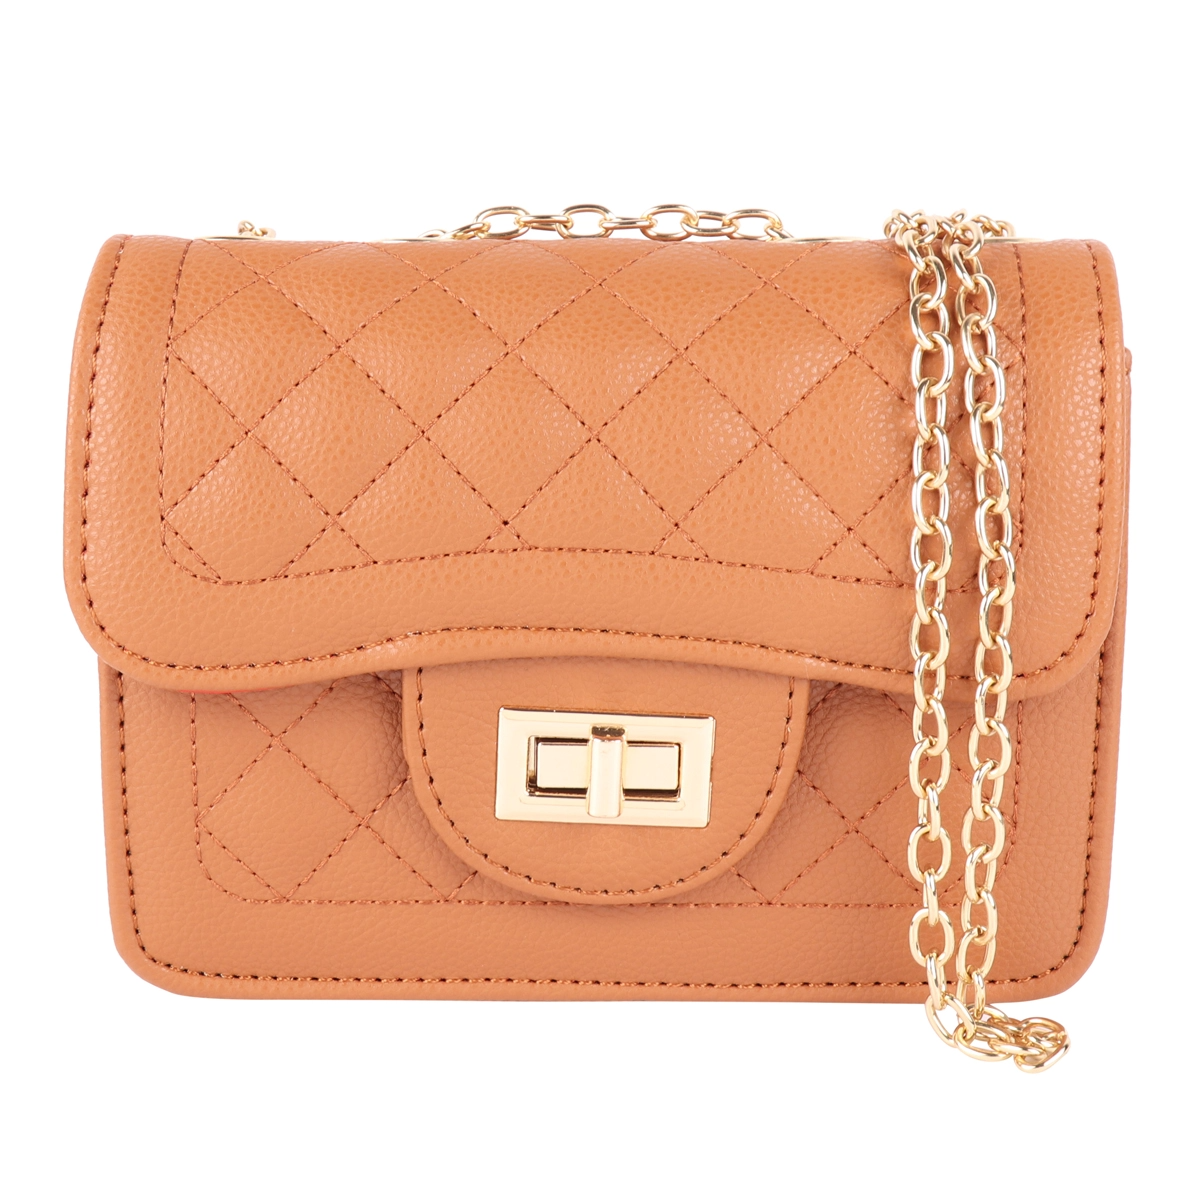 Quilted Diamond Leather Cross Body Bag - Tan - Mellow Monkey